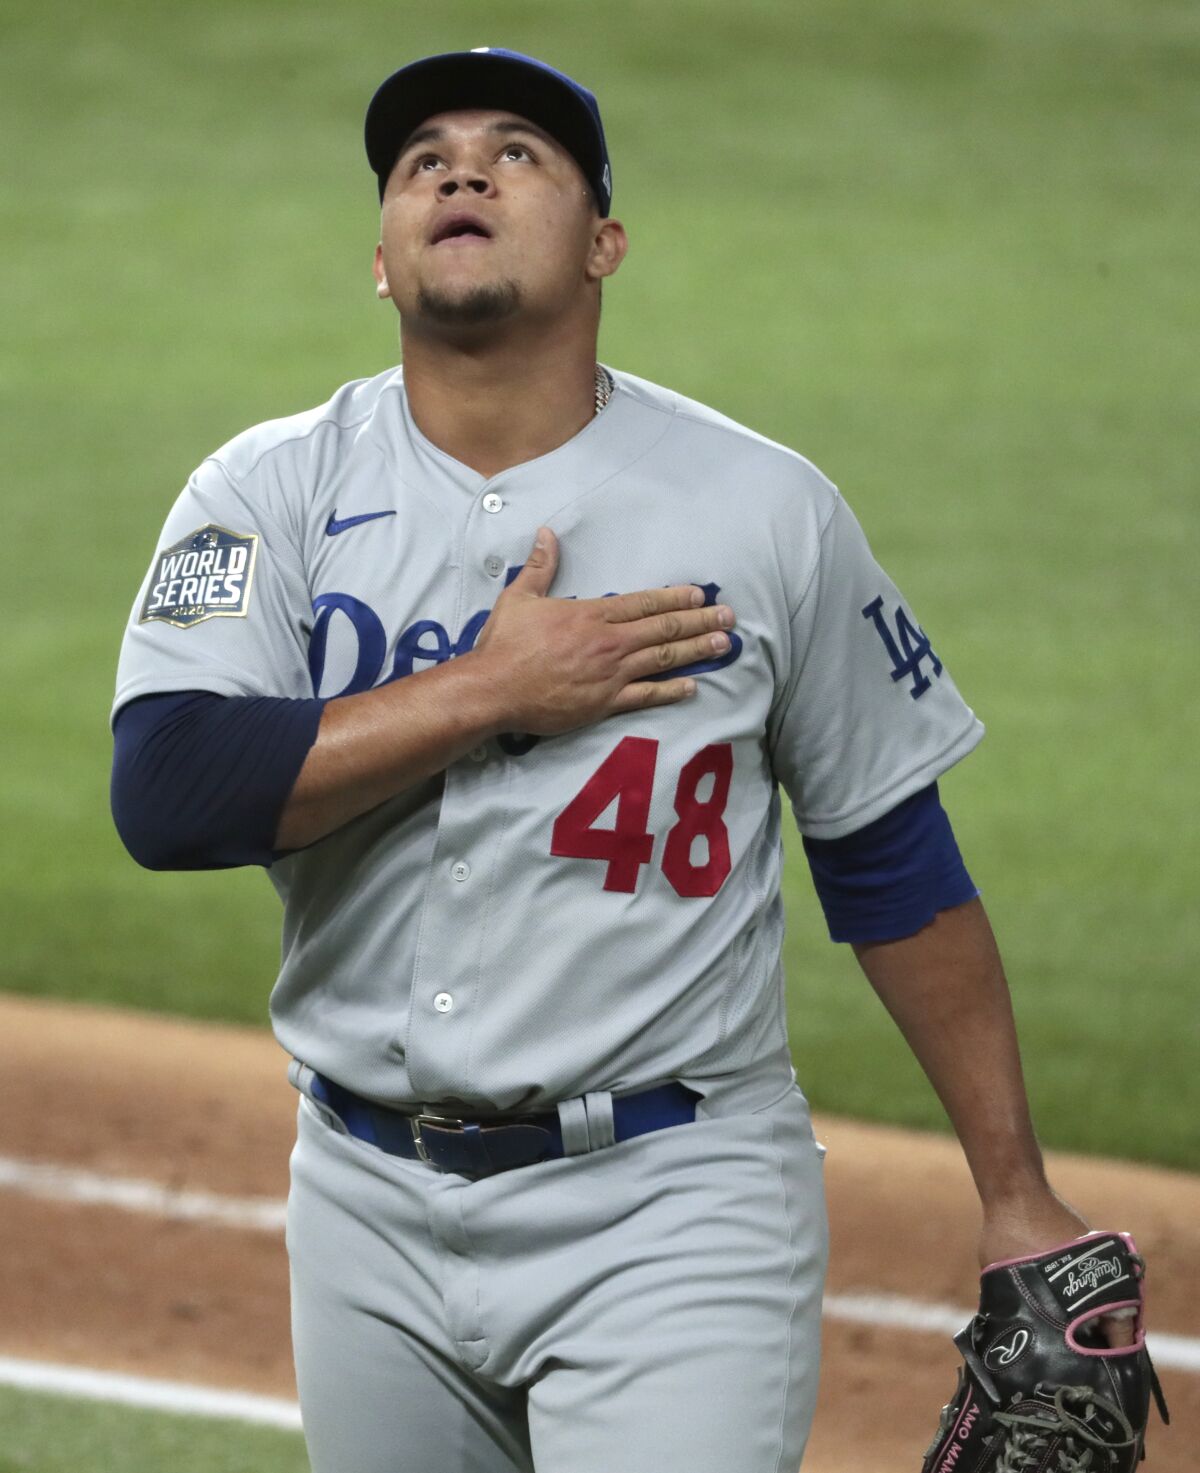 Dodgers relief pitcher Brusdar Graterol looks skyward after pitching a scoreless eighth inning.